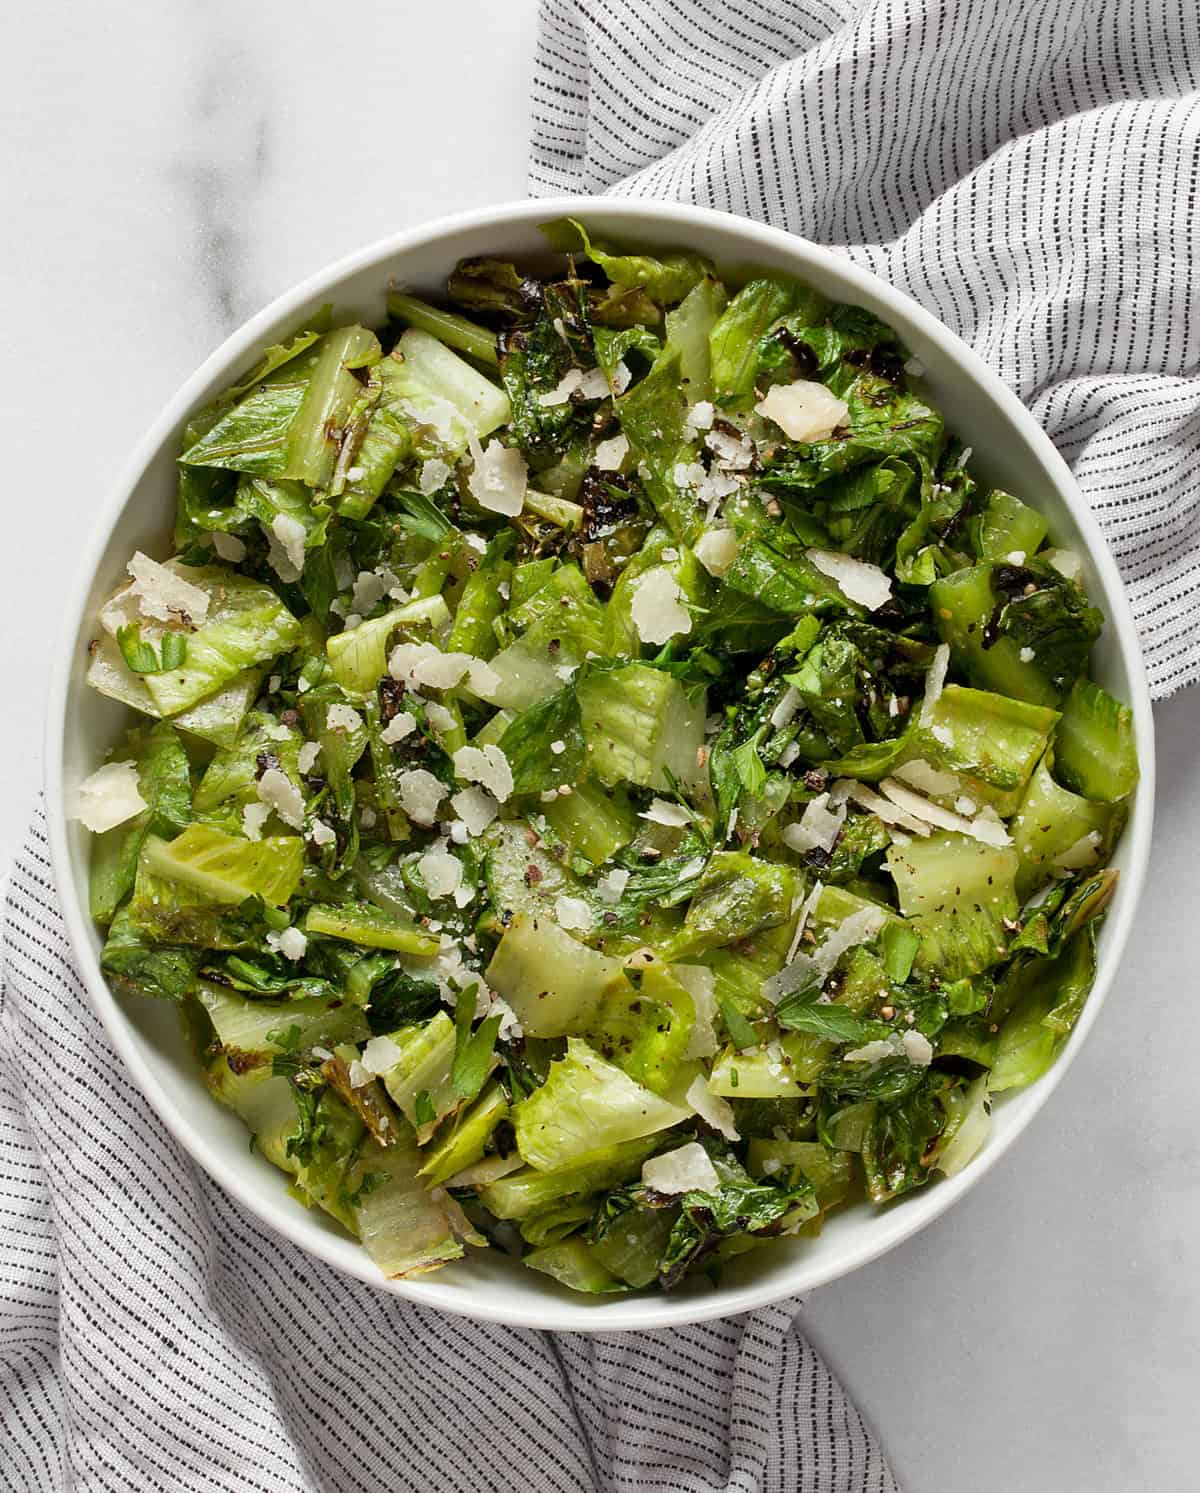 Chopped romaine salad in a bowl.